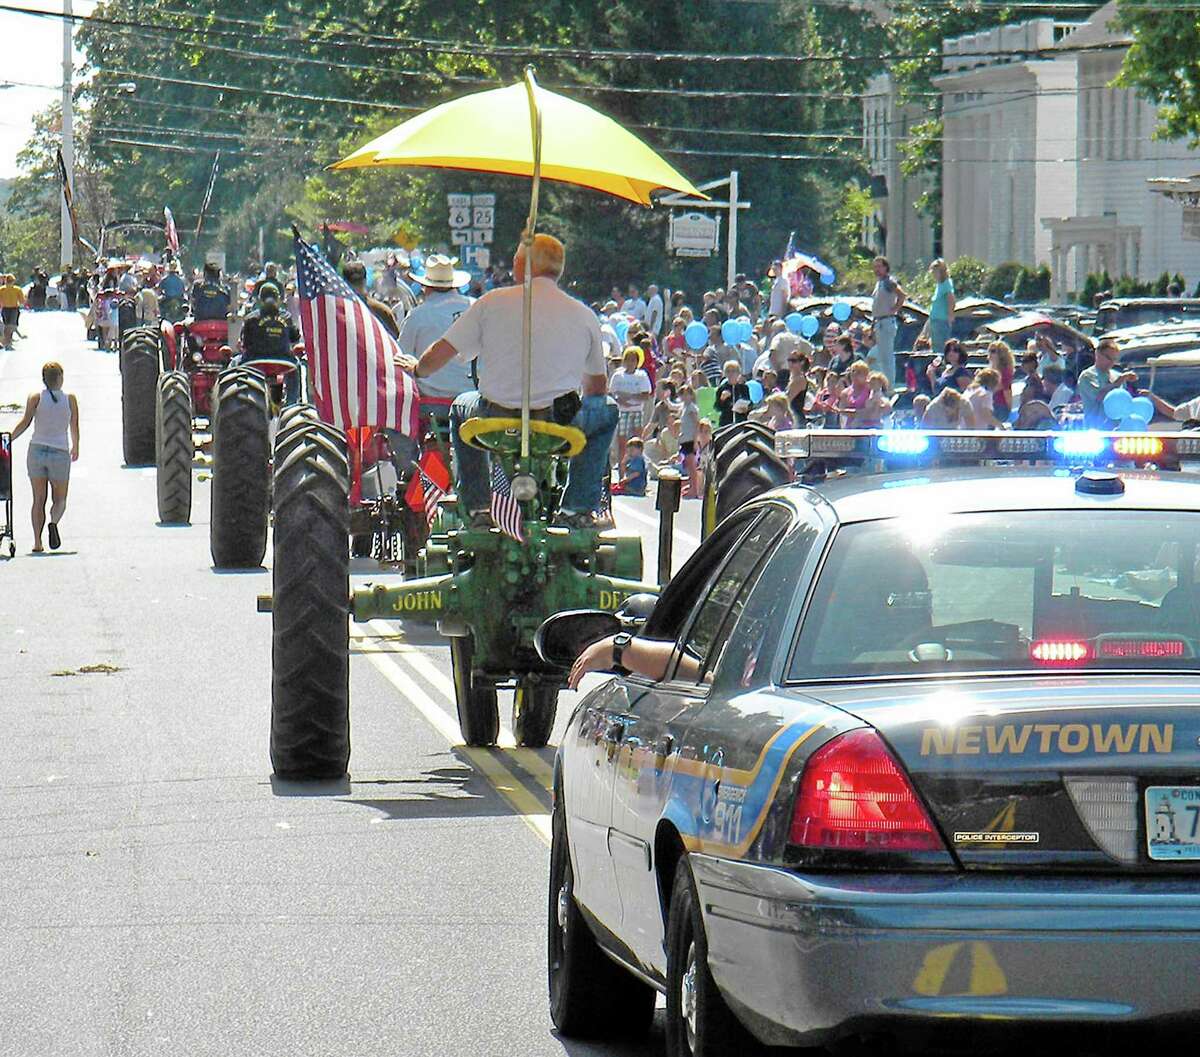 In this Sept. 7, 2009, photo, a convoy of modern and antique tractors with a police escort brings up the rear of the Labor Day parade in Newtown, Conn. The town's upcoming 2013 parade faced for the first time calls and emails from regulars, folks who always marched, concerned about the most basic decision of all_how to proceed with a parade this year, nearly nine months after shootings at Sandy Hook Elementary School left 26 dead, 20 of them children. (AP Photo/Chris Sullivan)